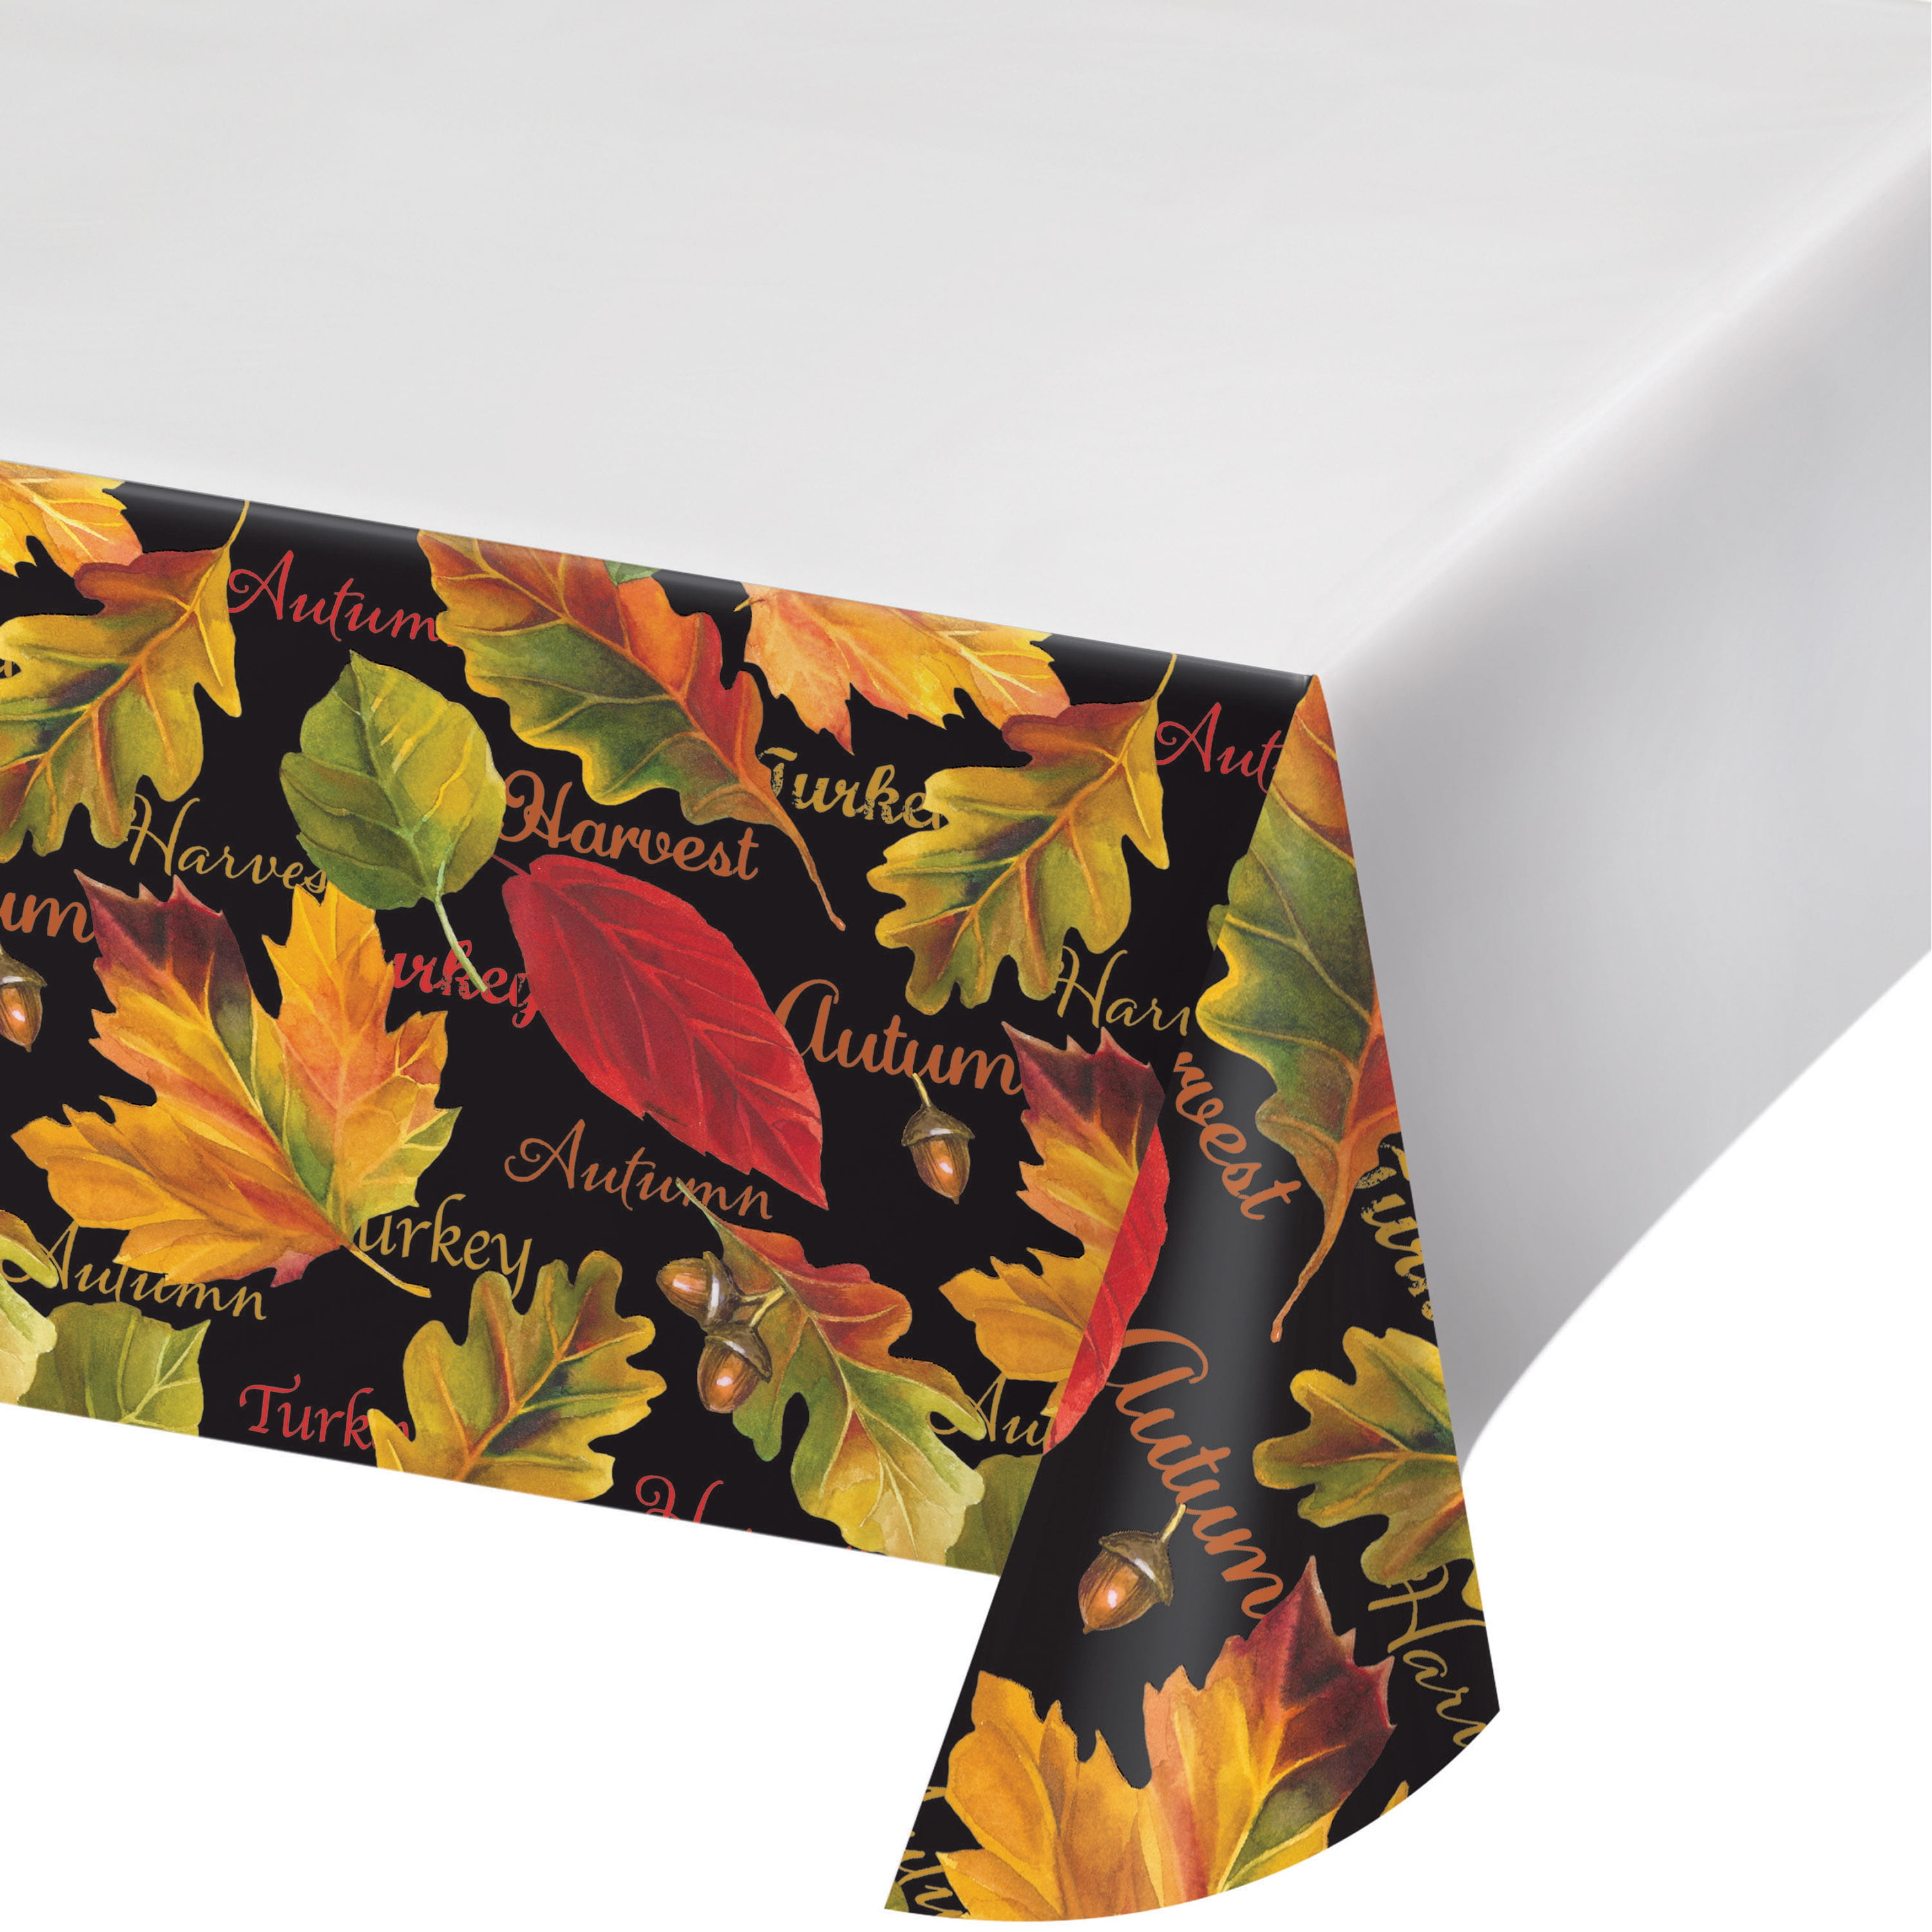 Autumn Expresions Plastic Tablecloth, 1 pack